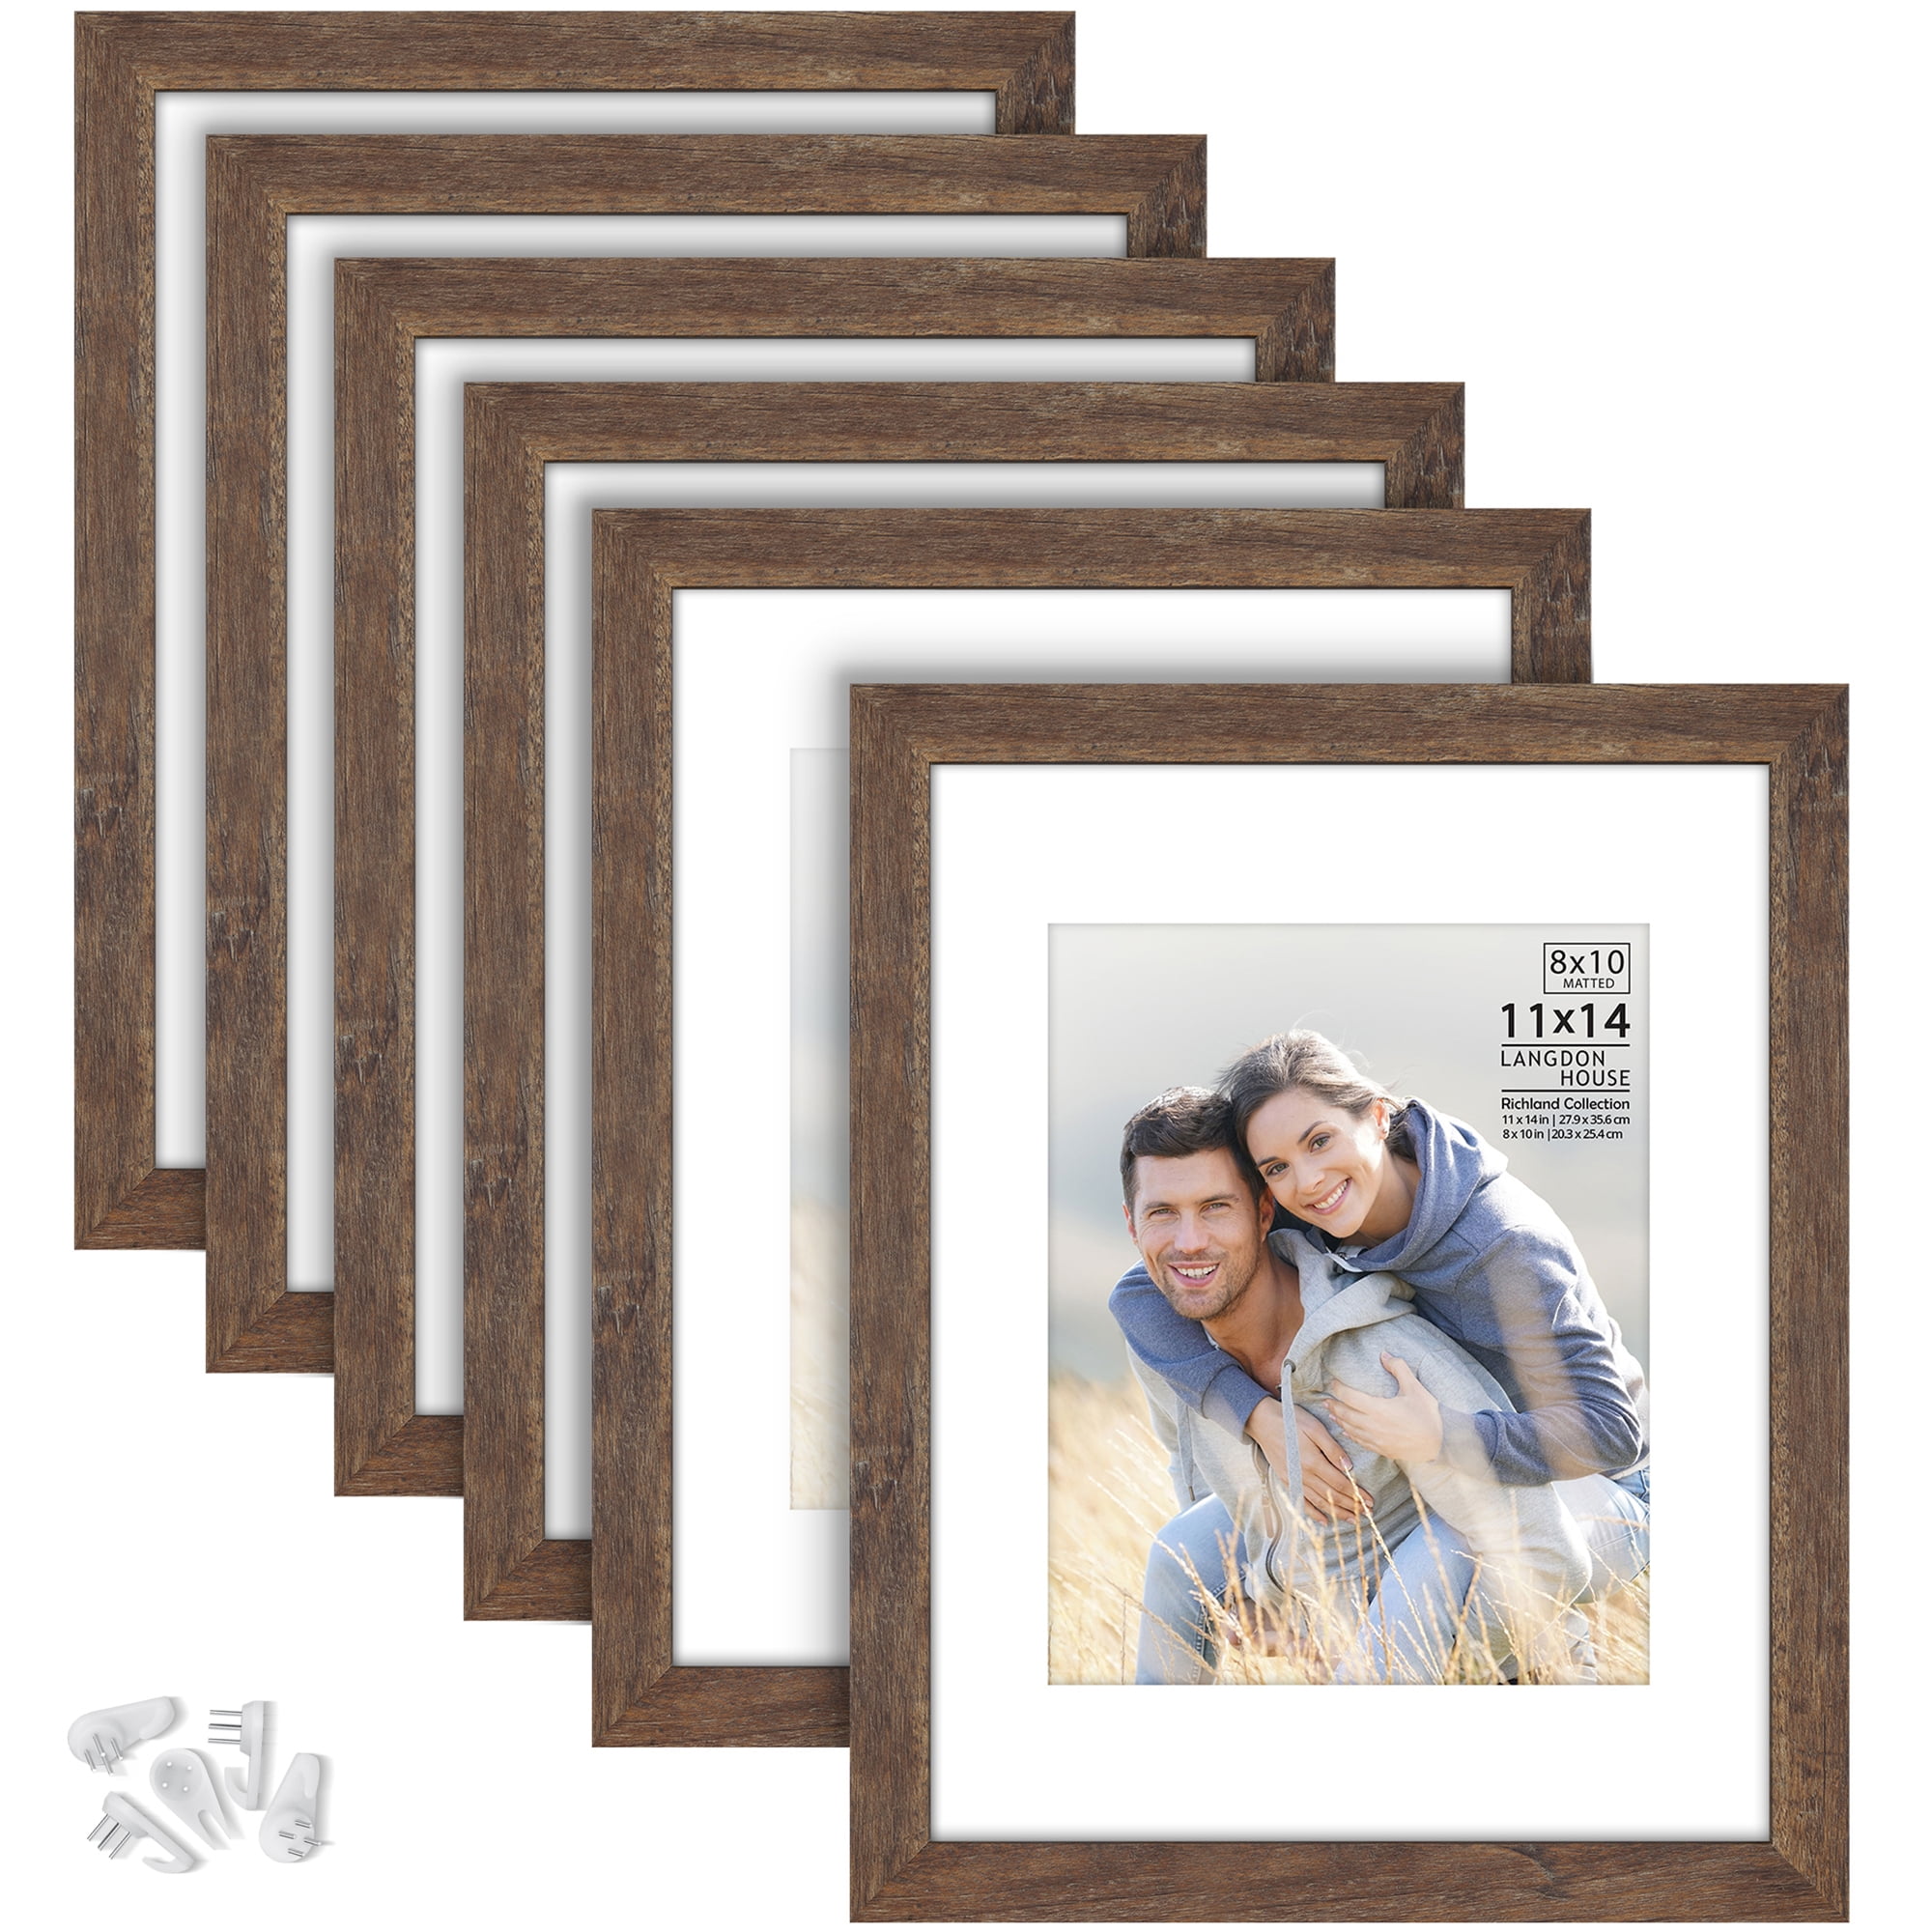 Langdon House 11x14 Almond White Picture Frames w/ Mat for 8x10 Photo,  Contemporary Farmhouse Style, 6 Pack, Richland Collection (US Company) 